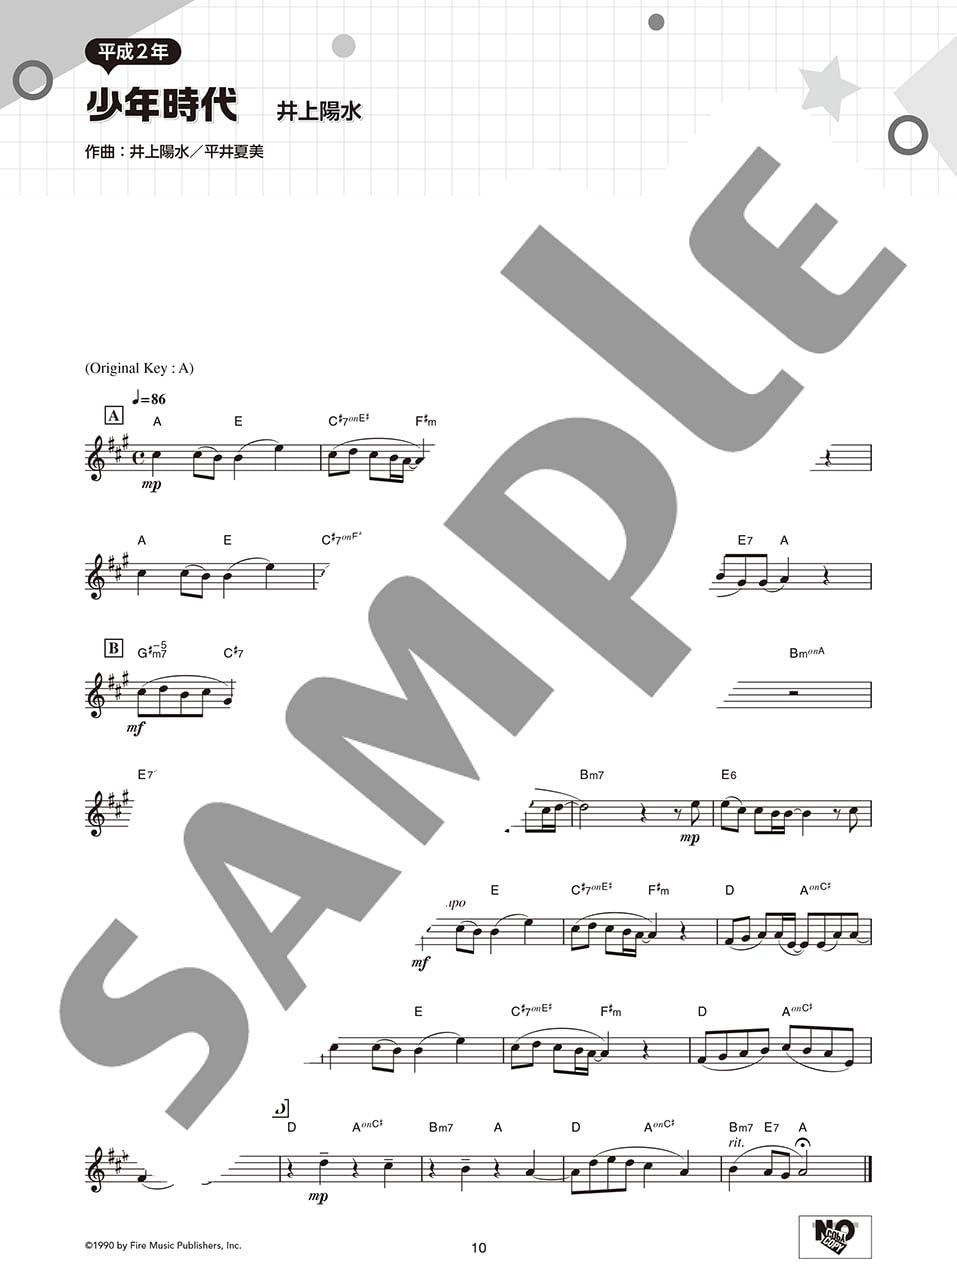 Japanese Hits from the Heisei Era(1981-2019) for Flute Solo Sheet Music Book